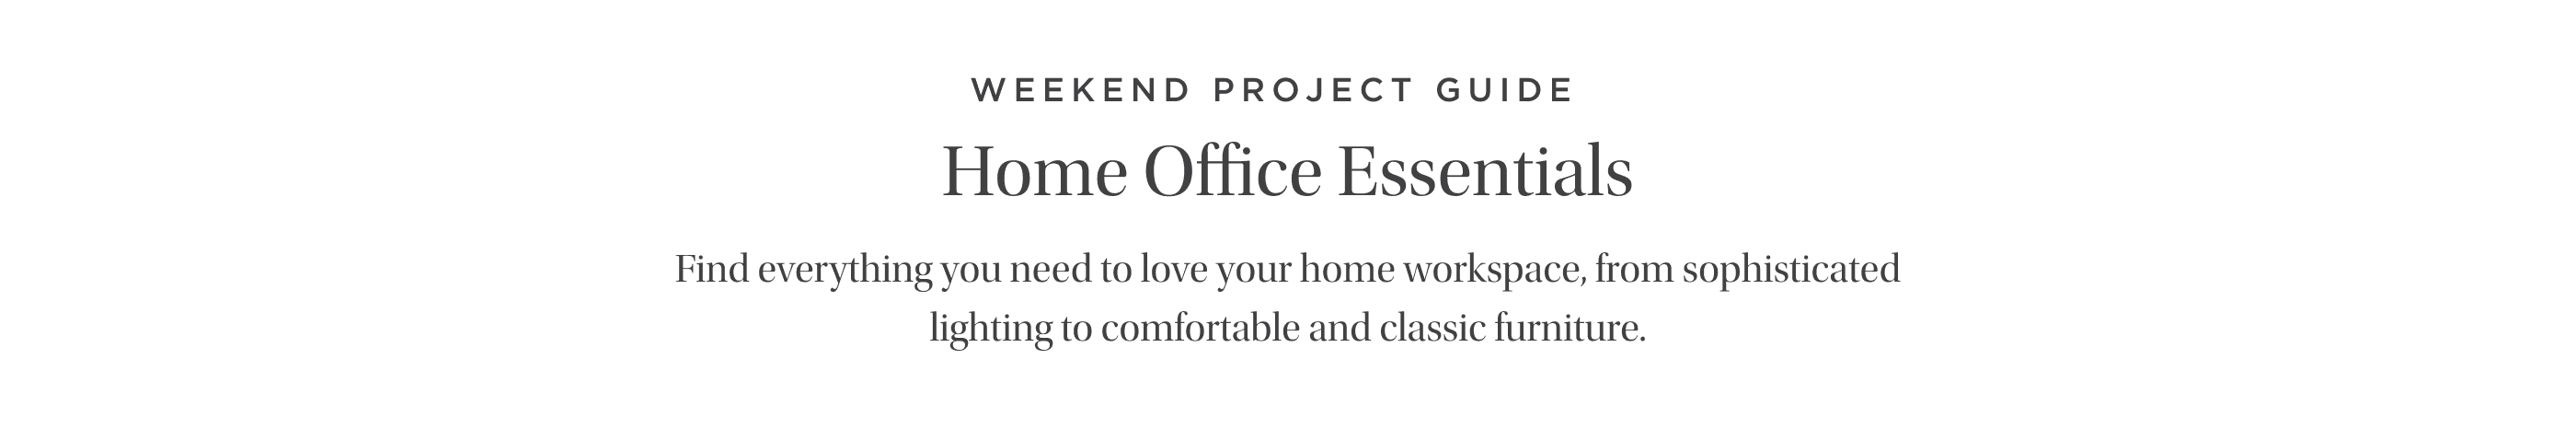 Home Office Essentials - Find everything you need to love your home workspace, from sophisticated lighting to comfortable and classic furniture.